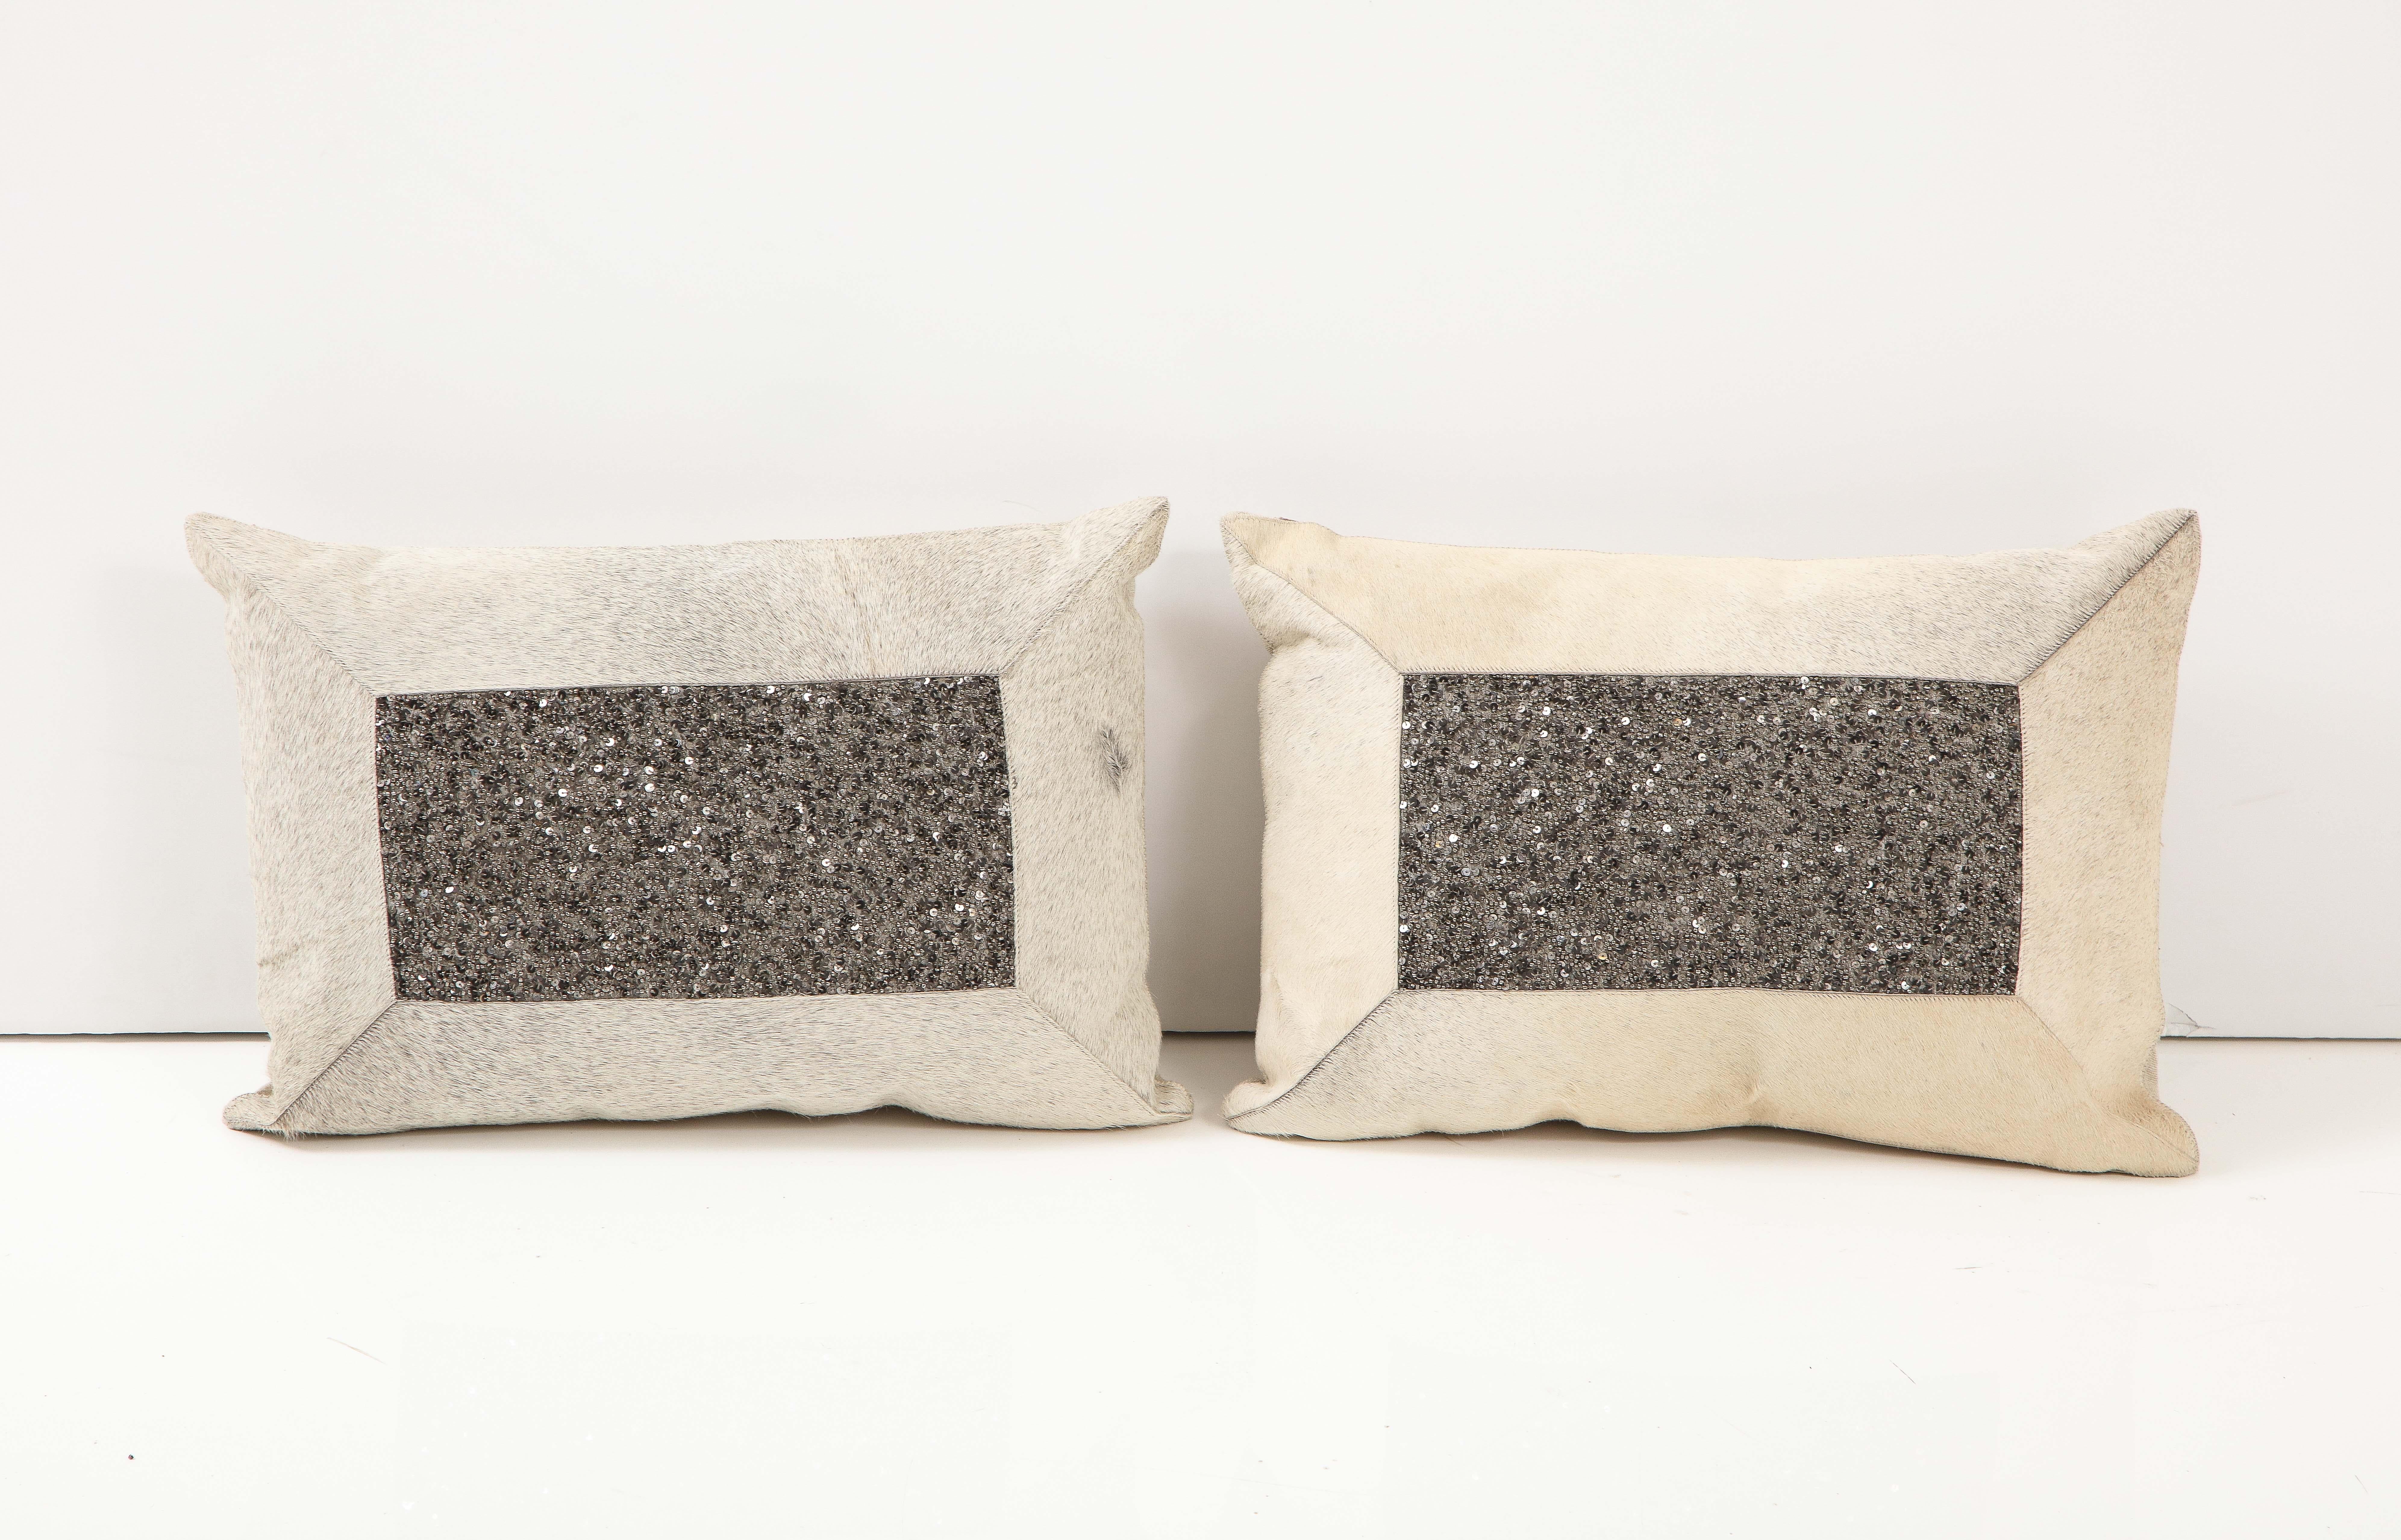 Pair of light grey/beige hide pillows with dark grey bead benters and zippered linen backs. Feather/Down inserts.